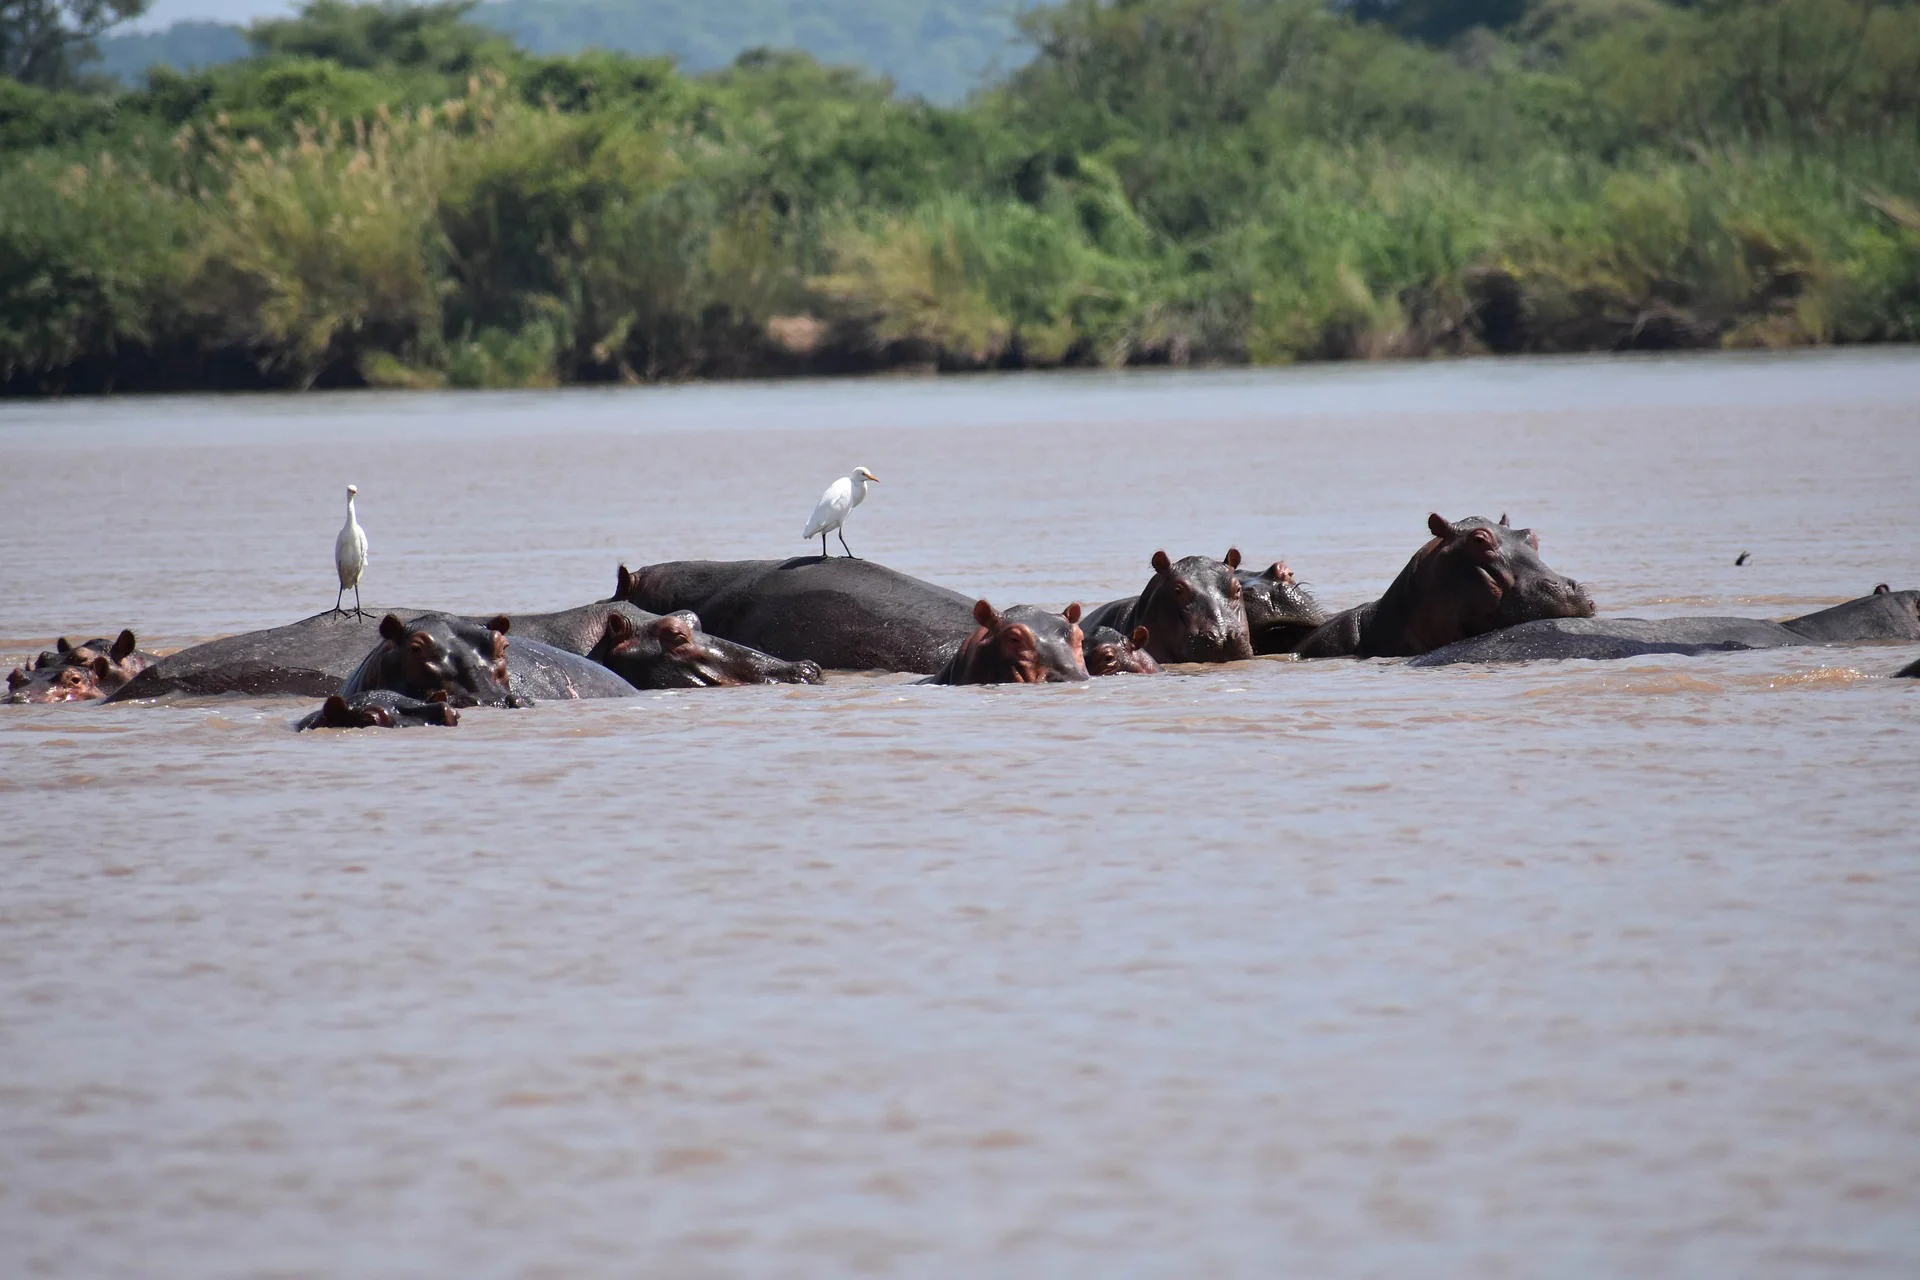 hippos at the river in Africa